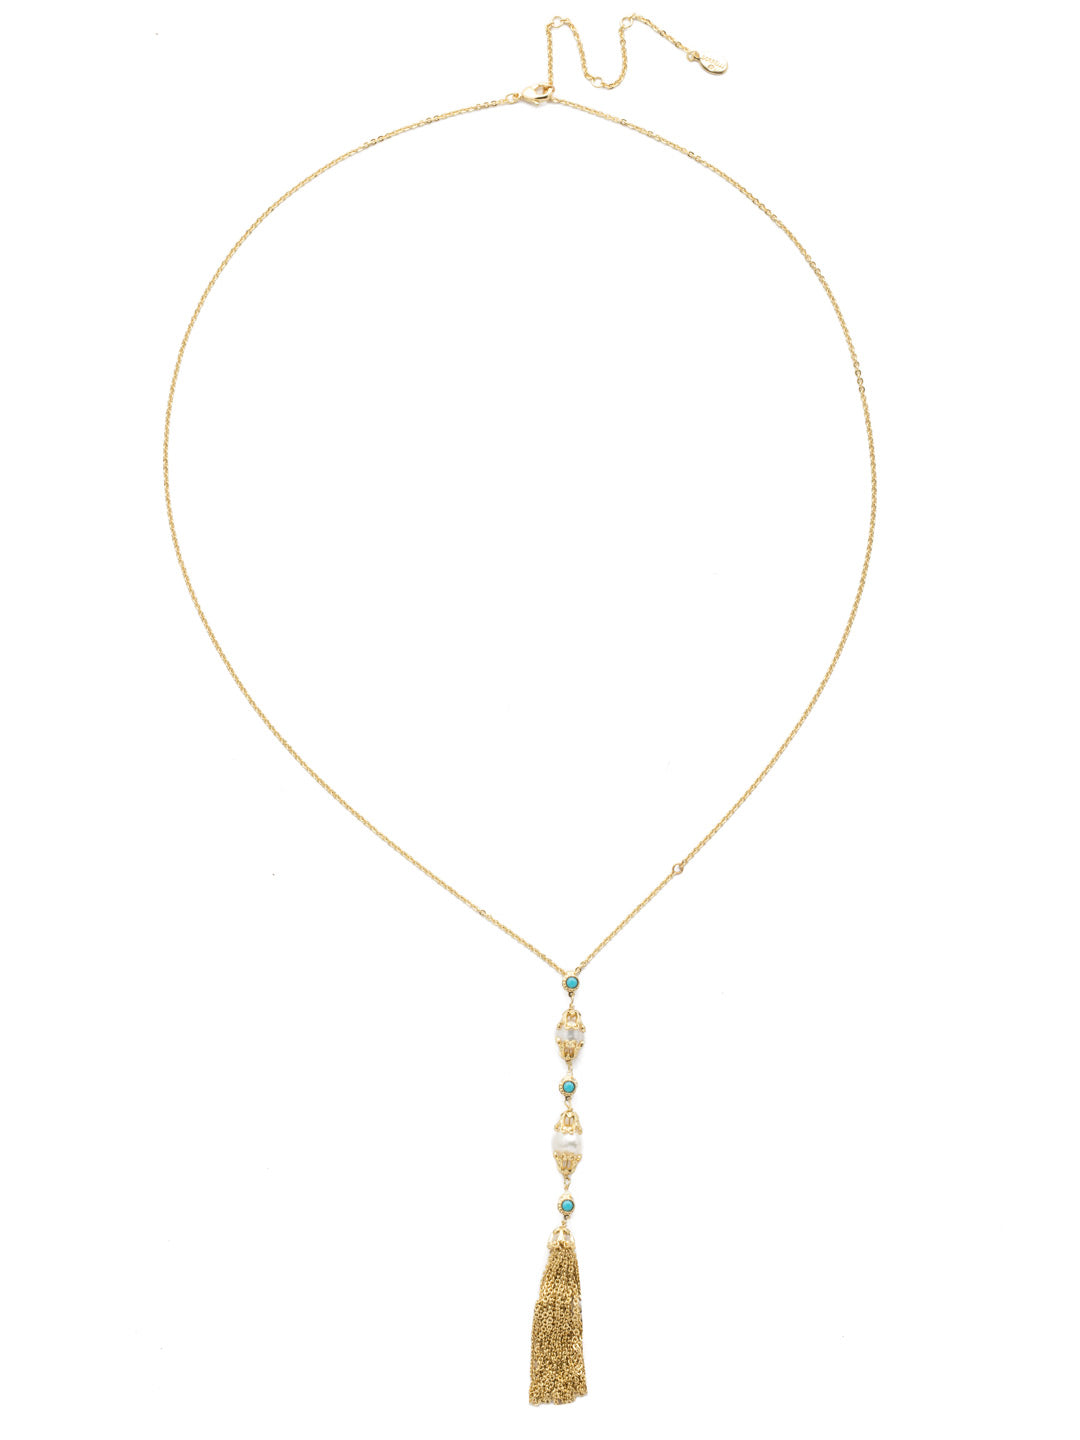 Concetta Long Strand Necklace - NEC13BGPLP - <p>This tiered long strand necklace features alternating crystal, pearl and metal elements. The finishing touch is a delicate multi-chain tassel. From Sorrelli's Polished Pearl collection in our Bright Gold-tone finish.</p>